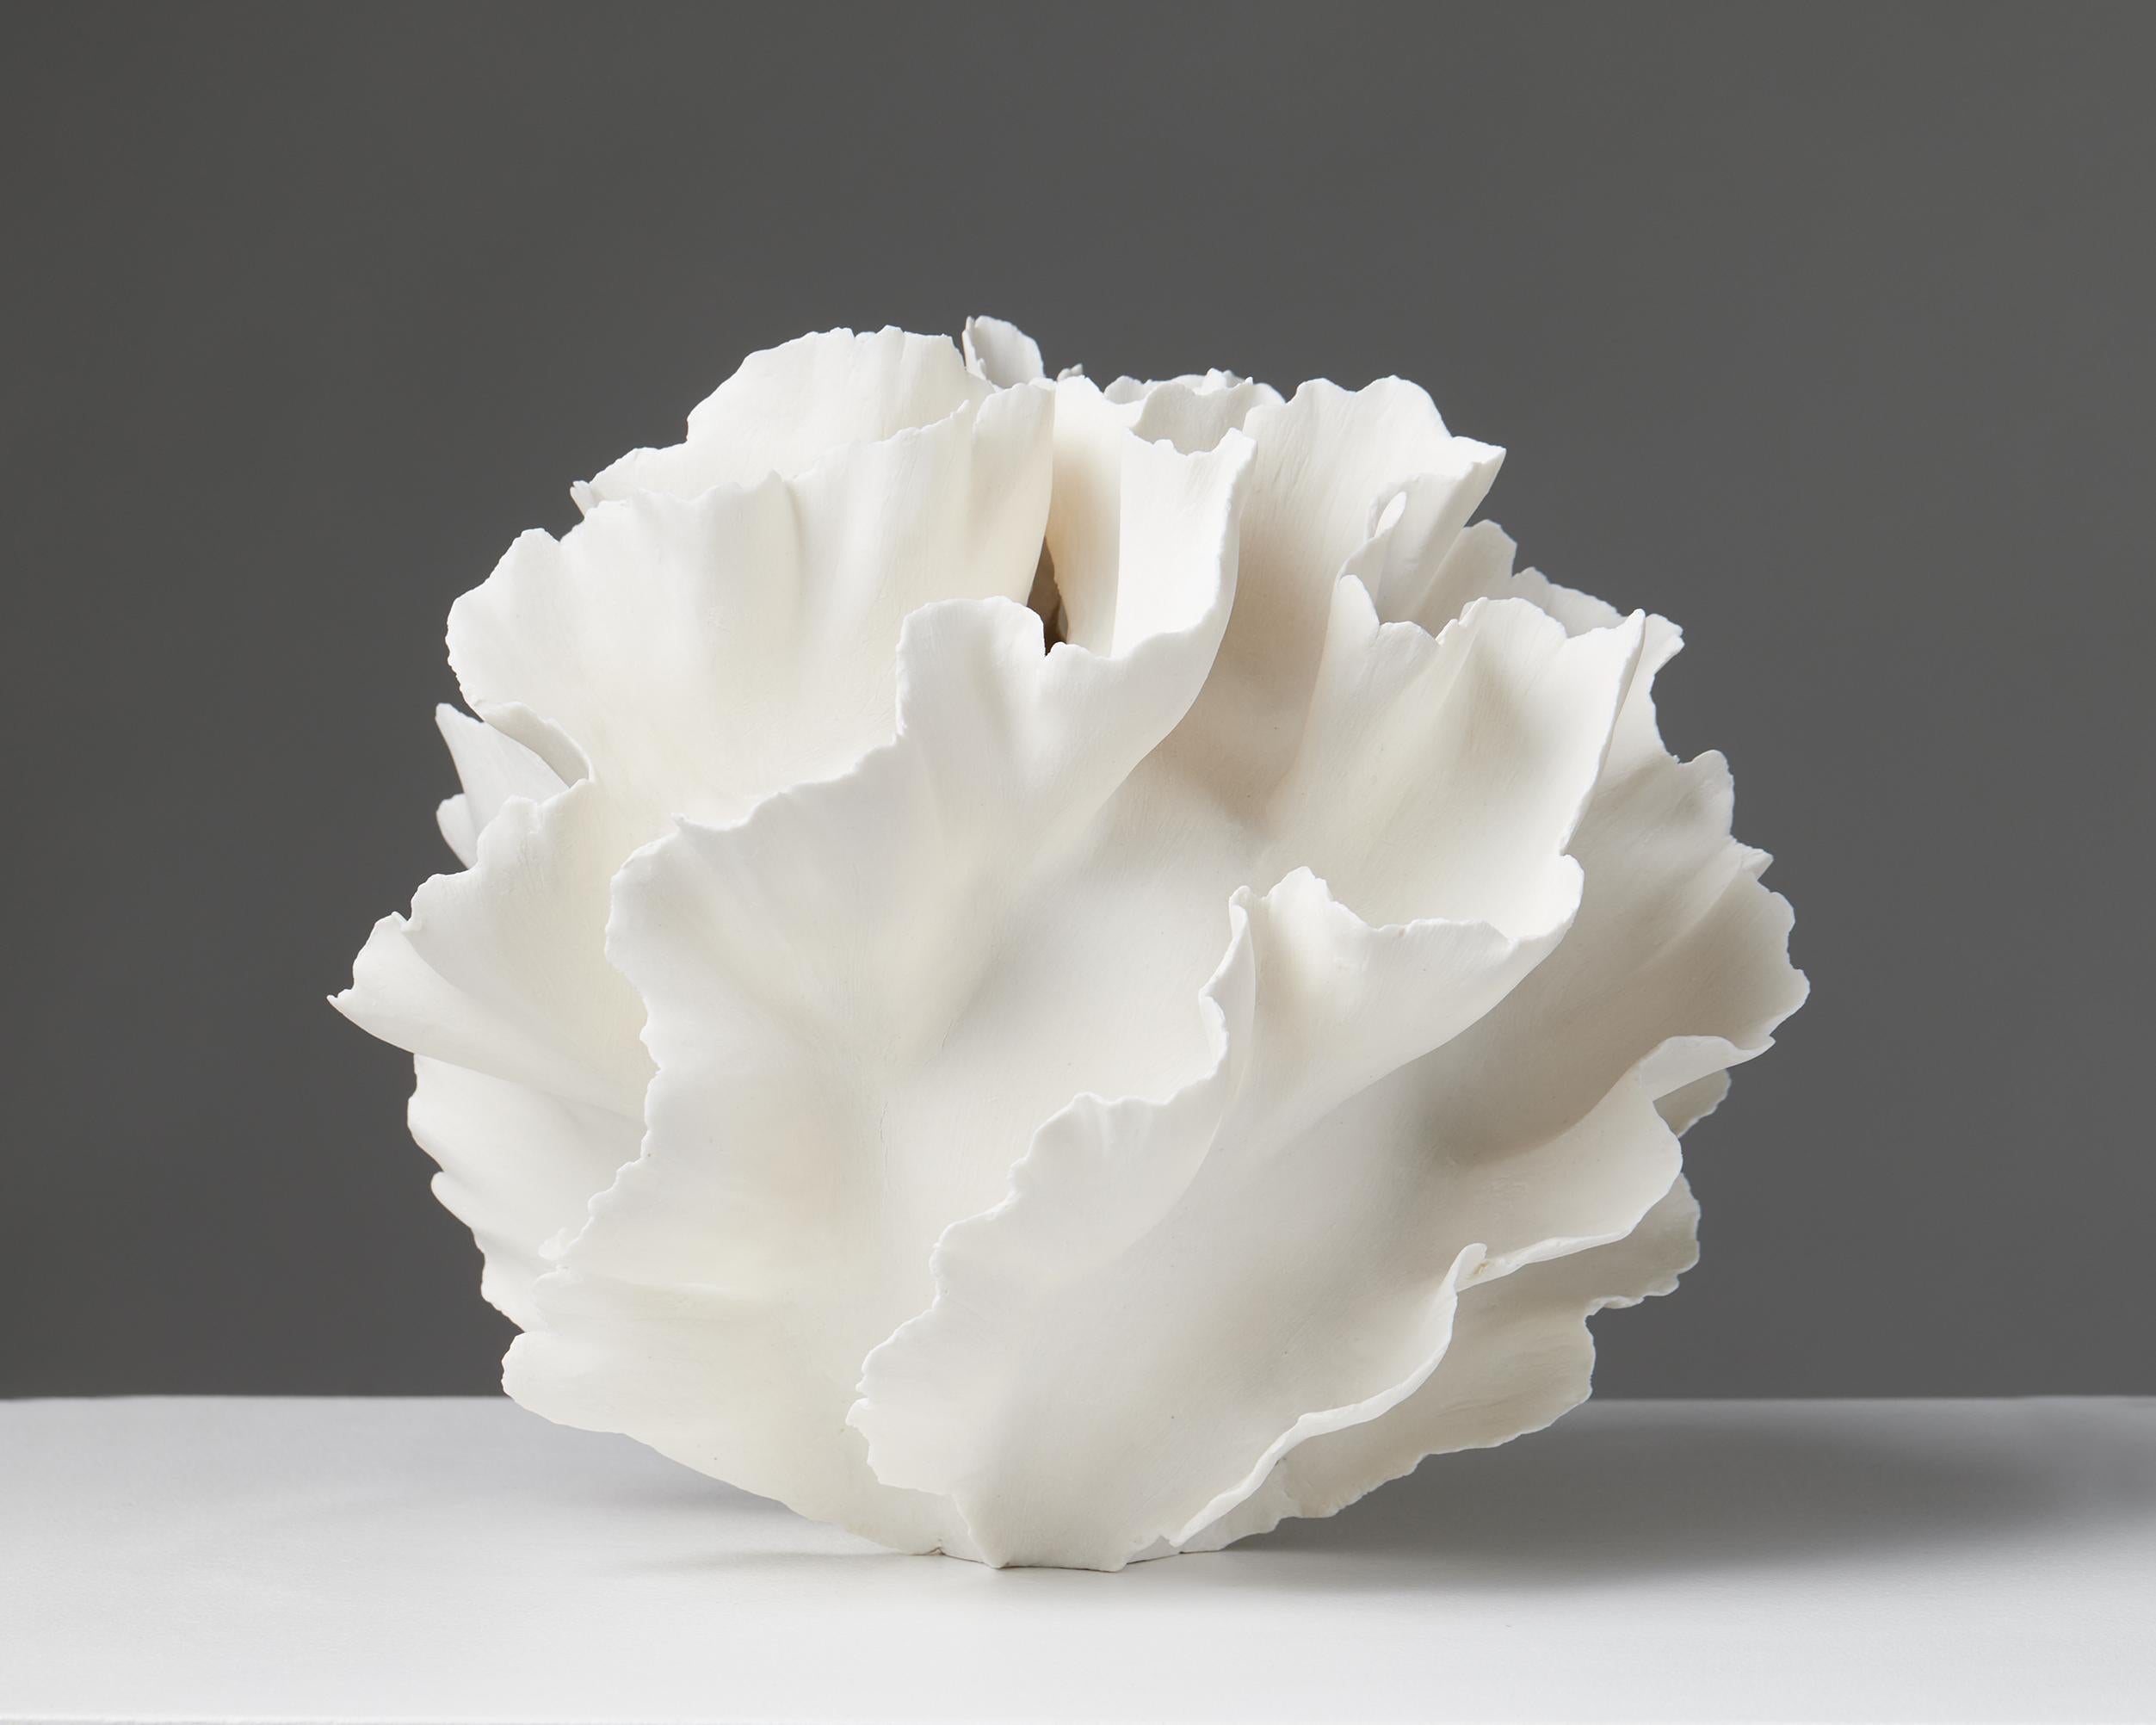 Vessel by Sandra Davolio,
Denmark, 2022.

Porcelain.

Unique.

Signed.

Sandra Davolio is an acclaimed contemporary Danish-Italian ceramic artist who has been represented by Modernity for more than ten years. Davolio takes her inspiration